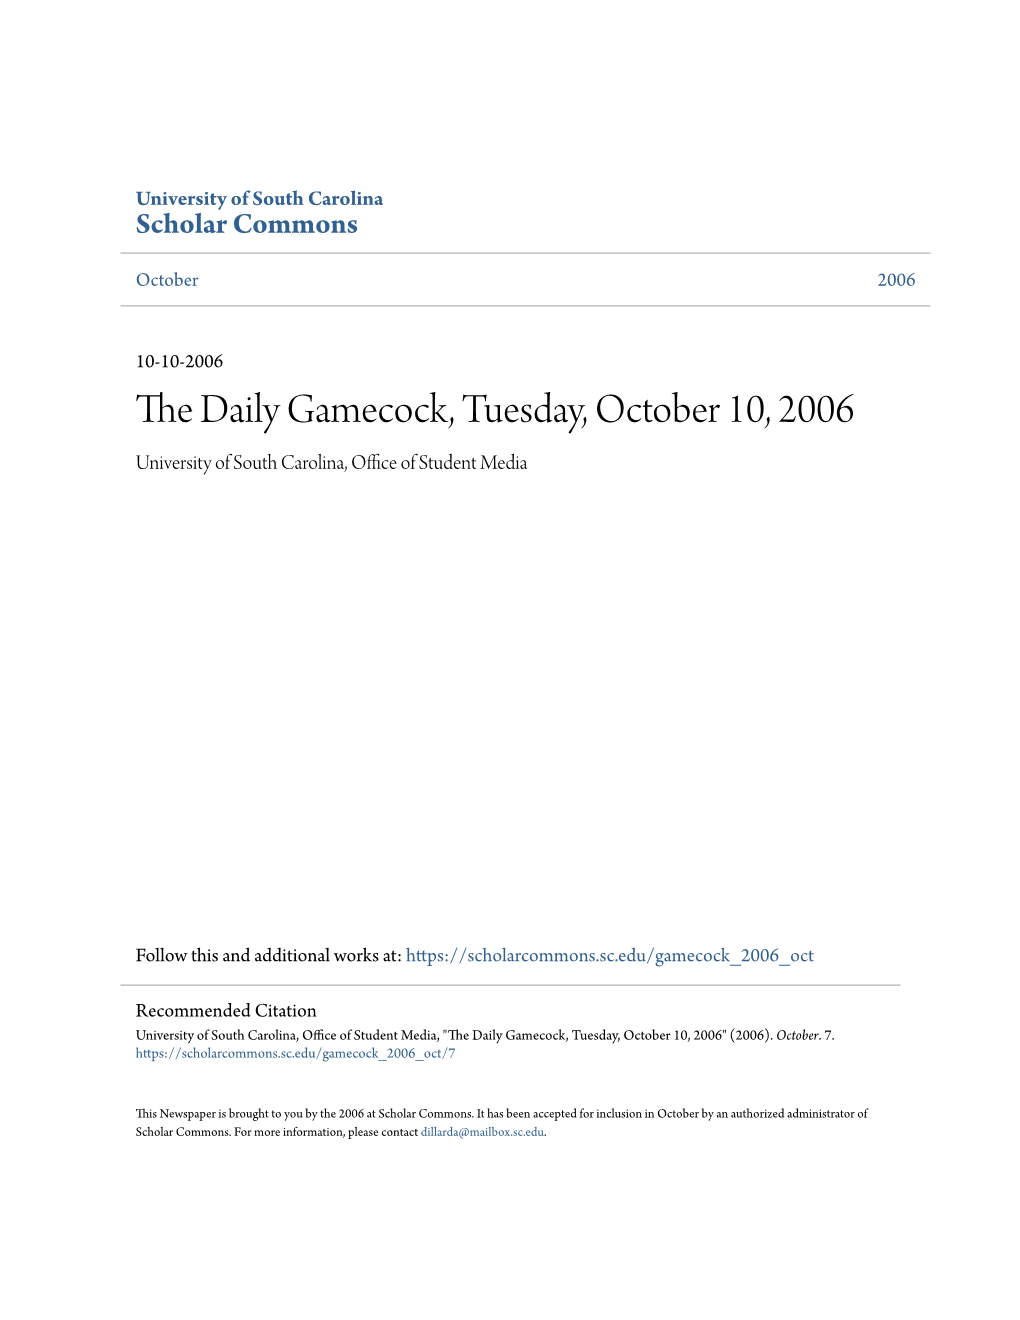 The Daily Gamecock, Tuesday, October 10, 2006